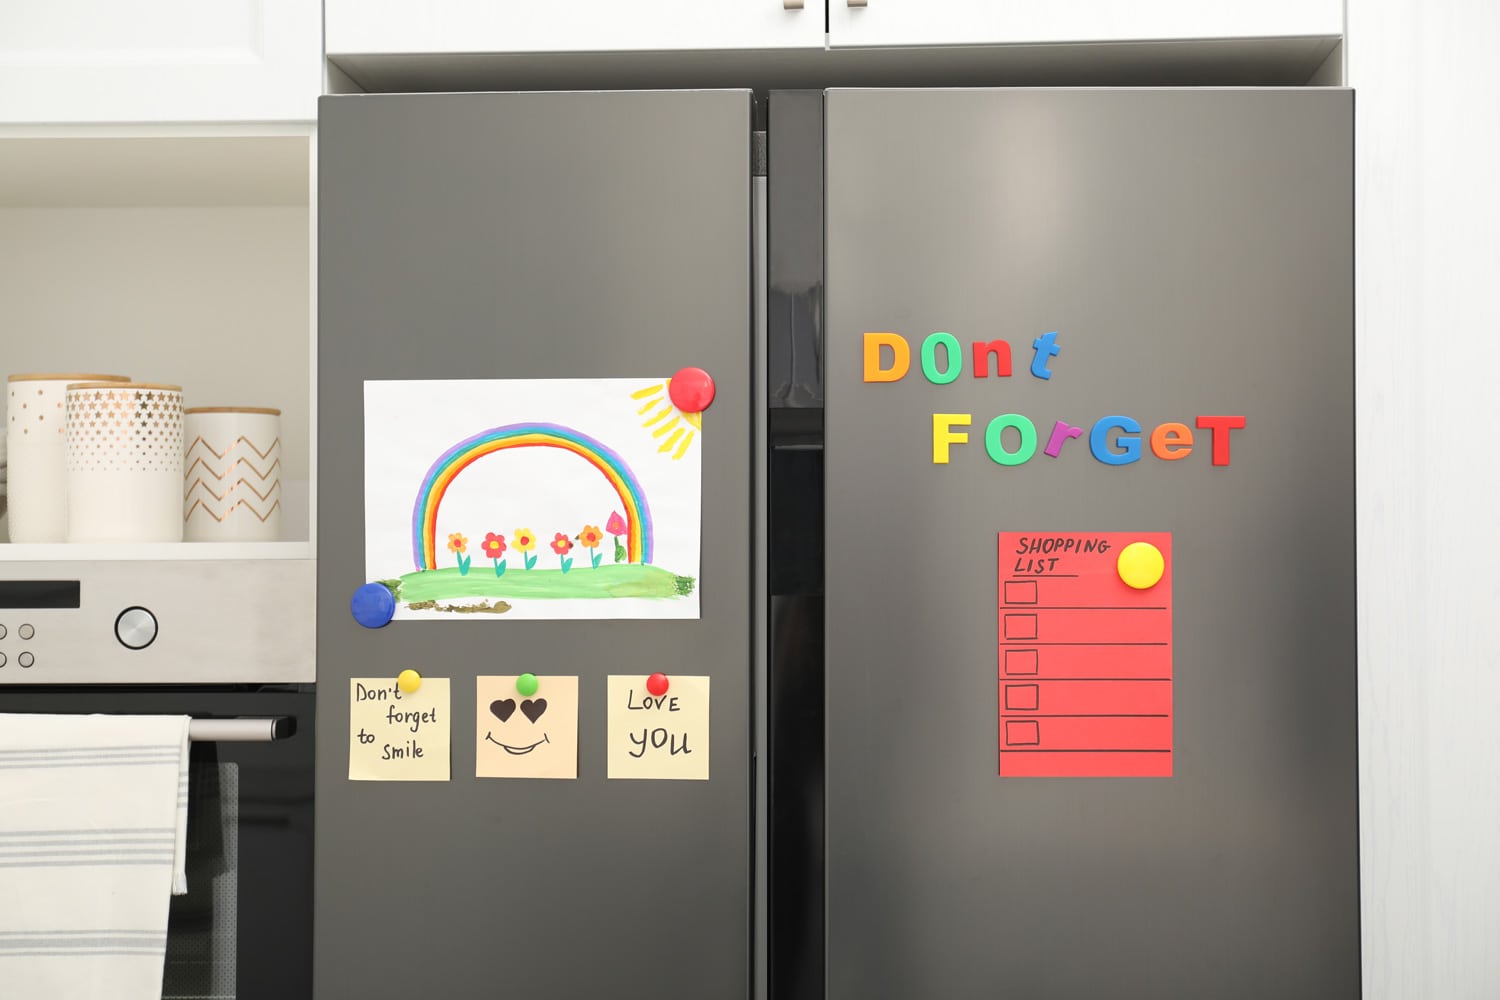 Modern refrigerator with child's drawing, notes and magnets in kitchen